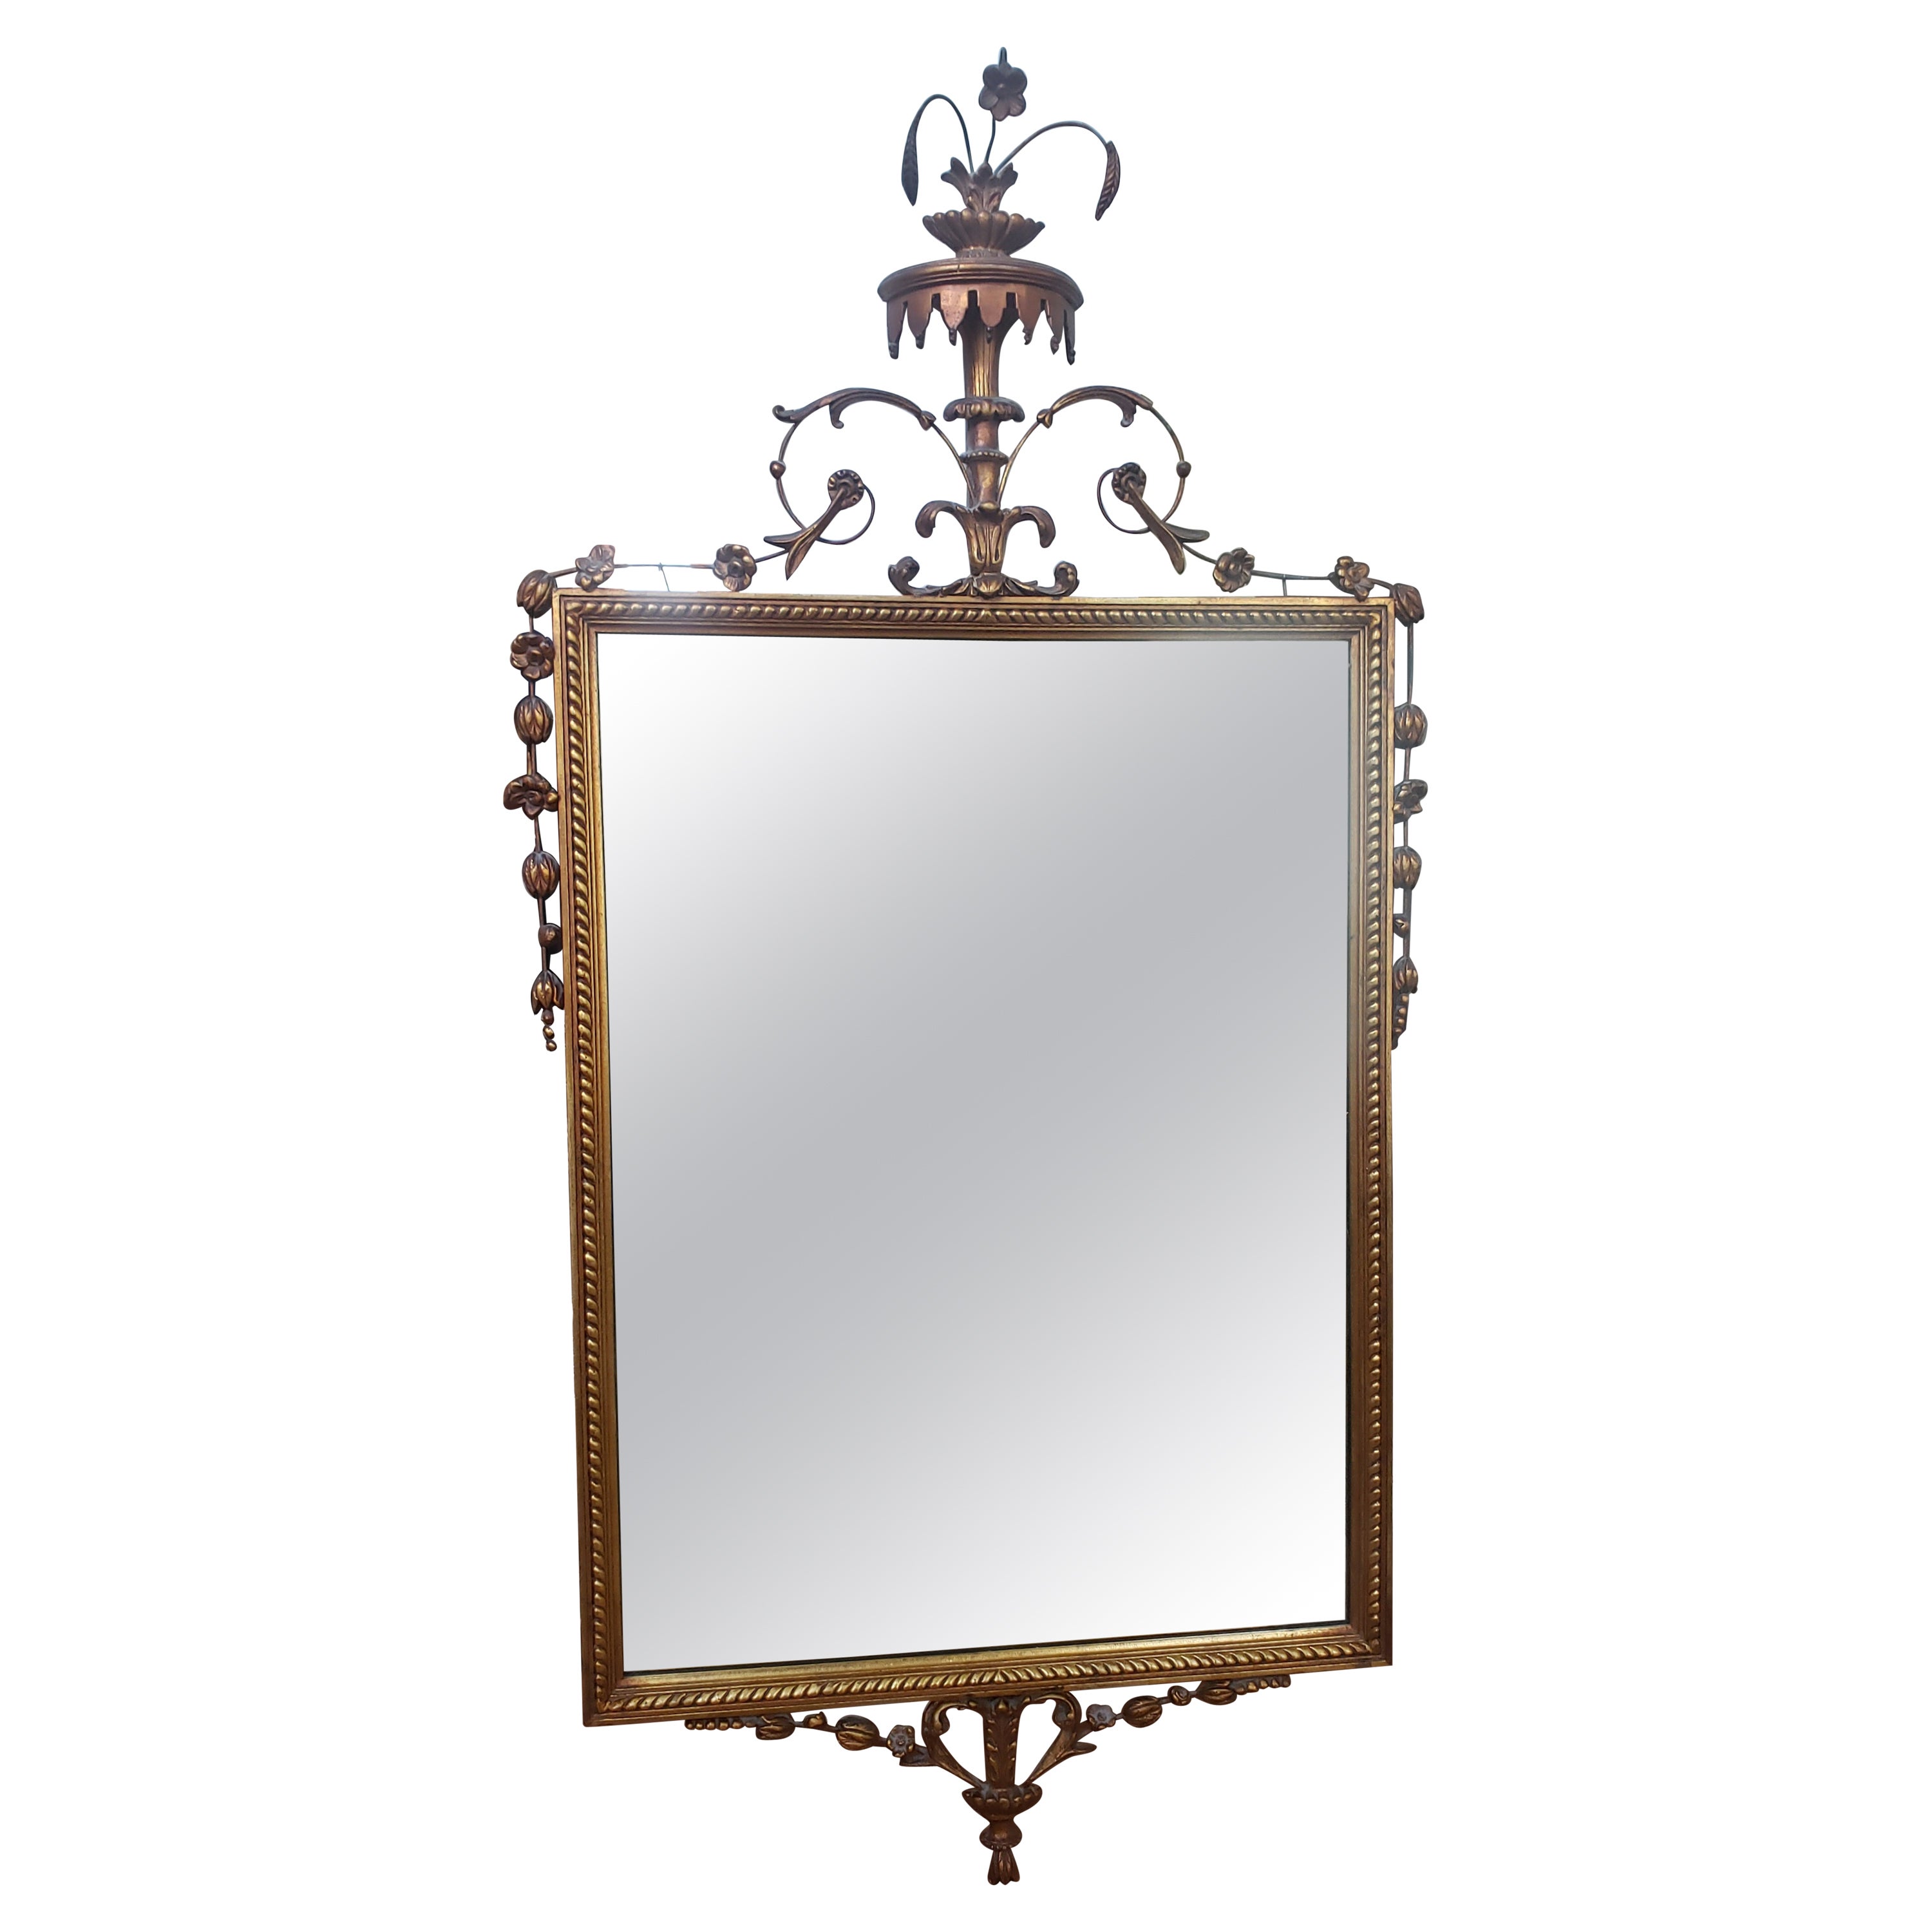 Early 20th Century French Empire Giltwood Frame Ornate Wall Mirror For Sale